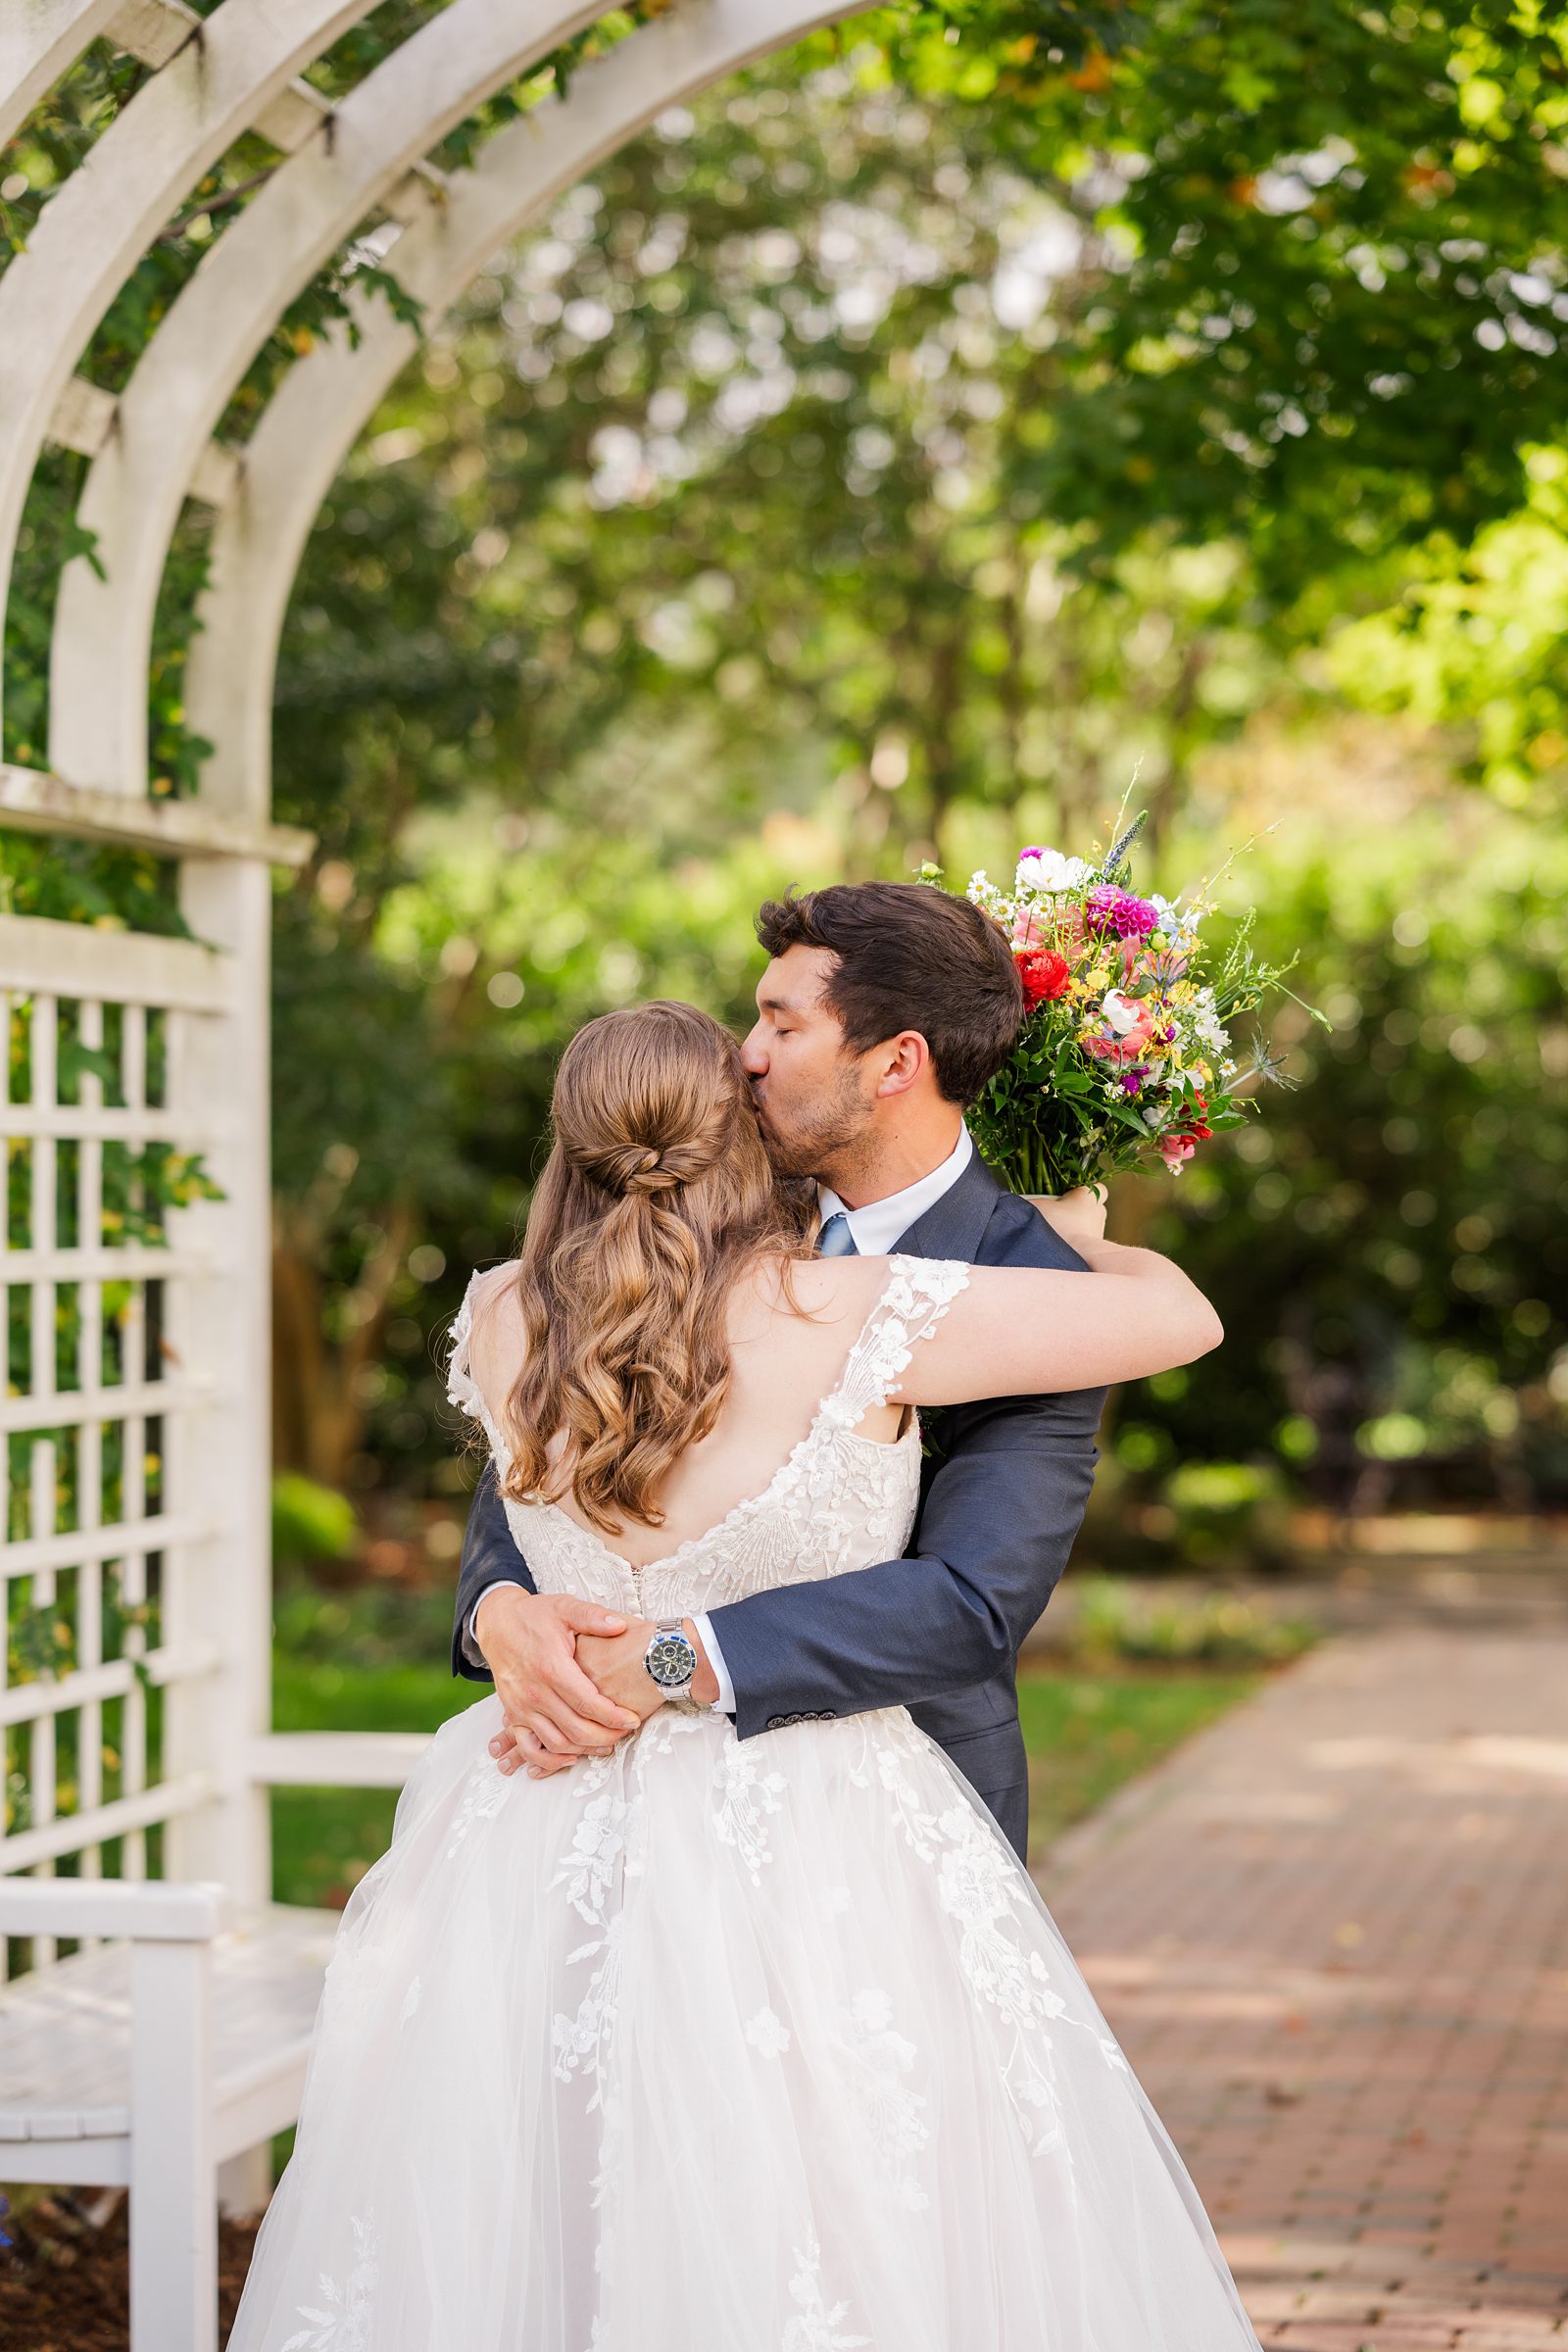 Bride and Groom First Look Portraits in the Garden at Fall Lewis Ginter Wedding 